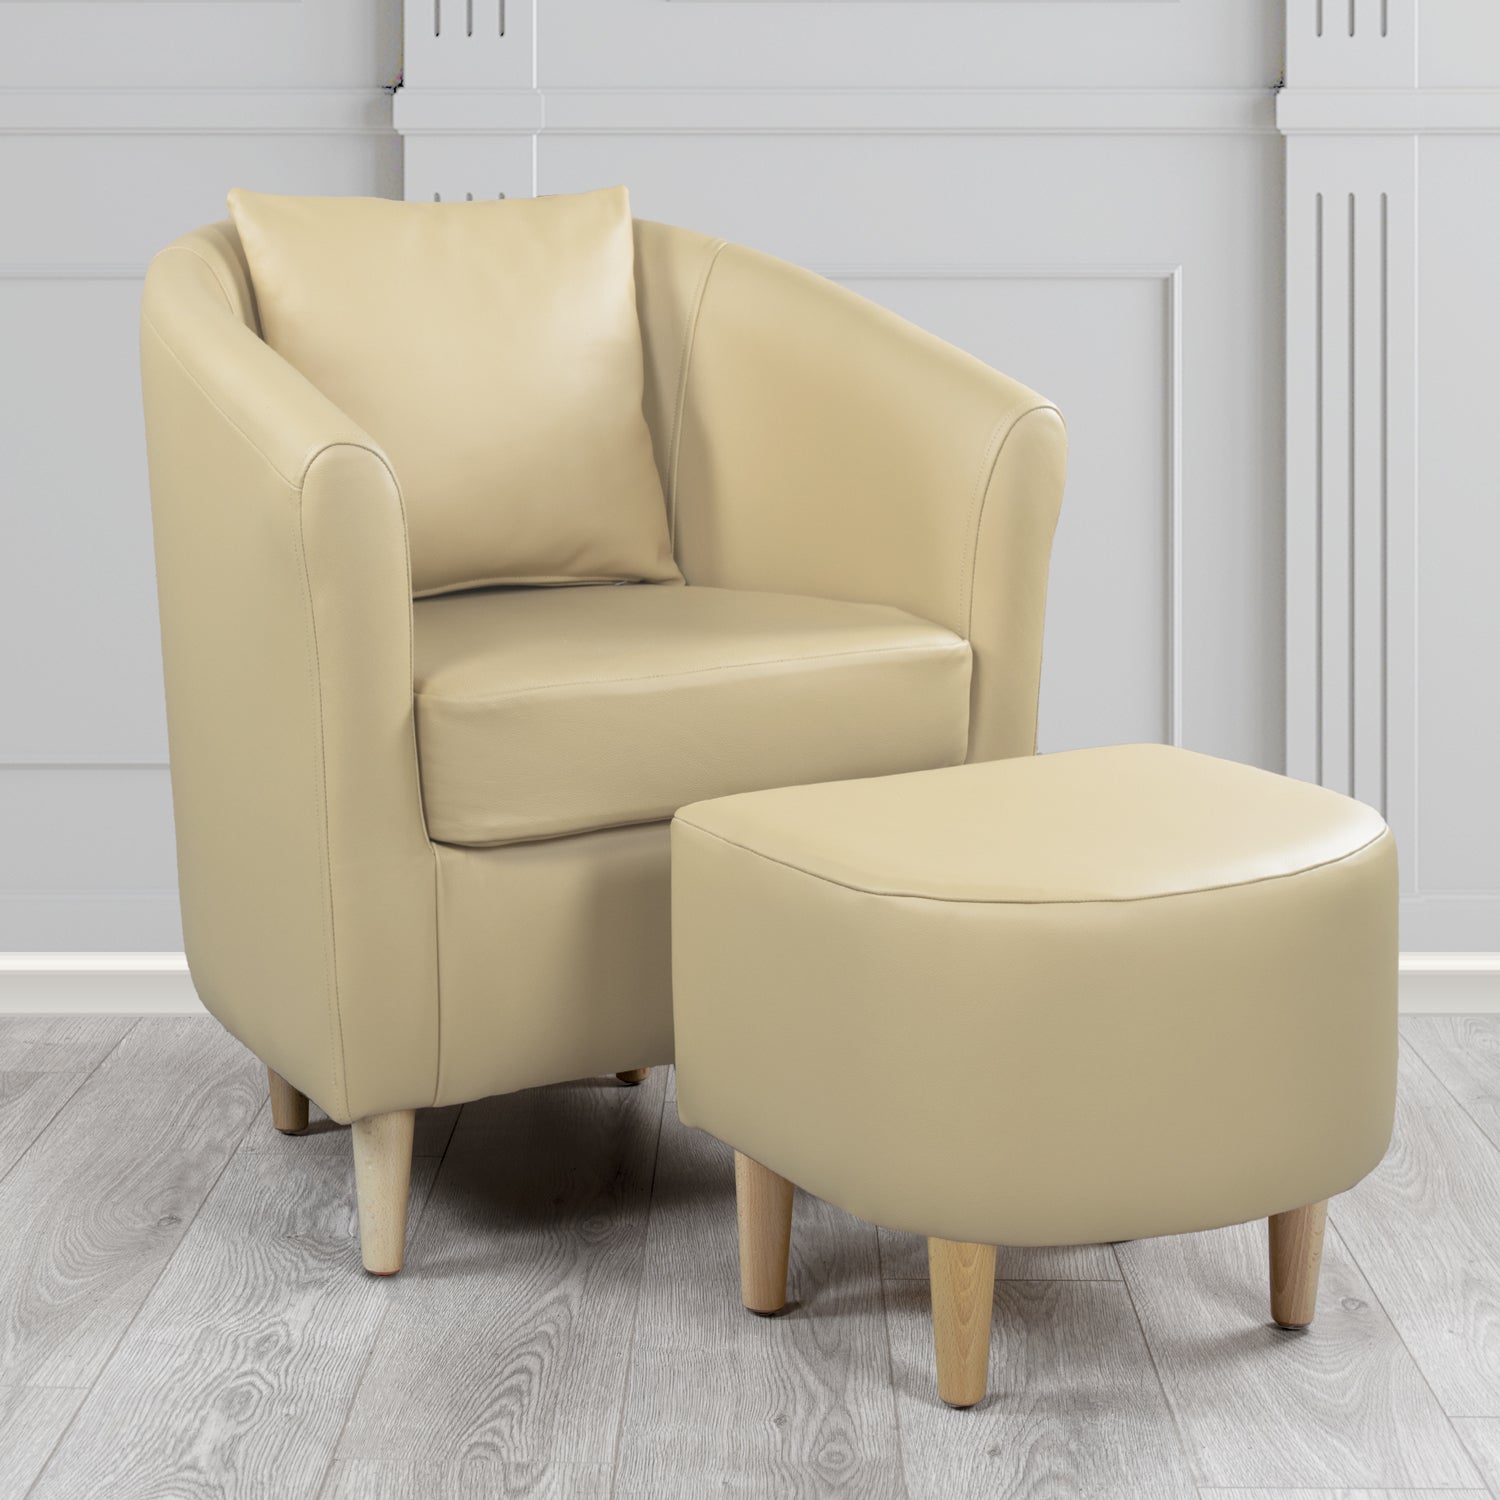 St Tropez Shelly Pebble Crib 5 Genuine Leather Tub Chair & Footstool Set With Scatter Cushion (6619512635434)